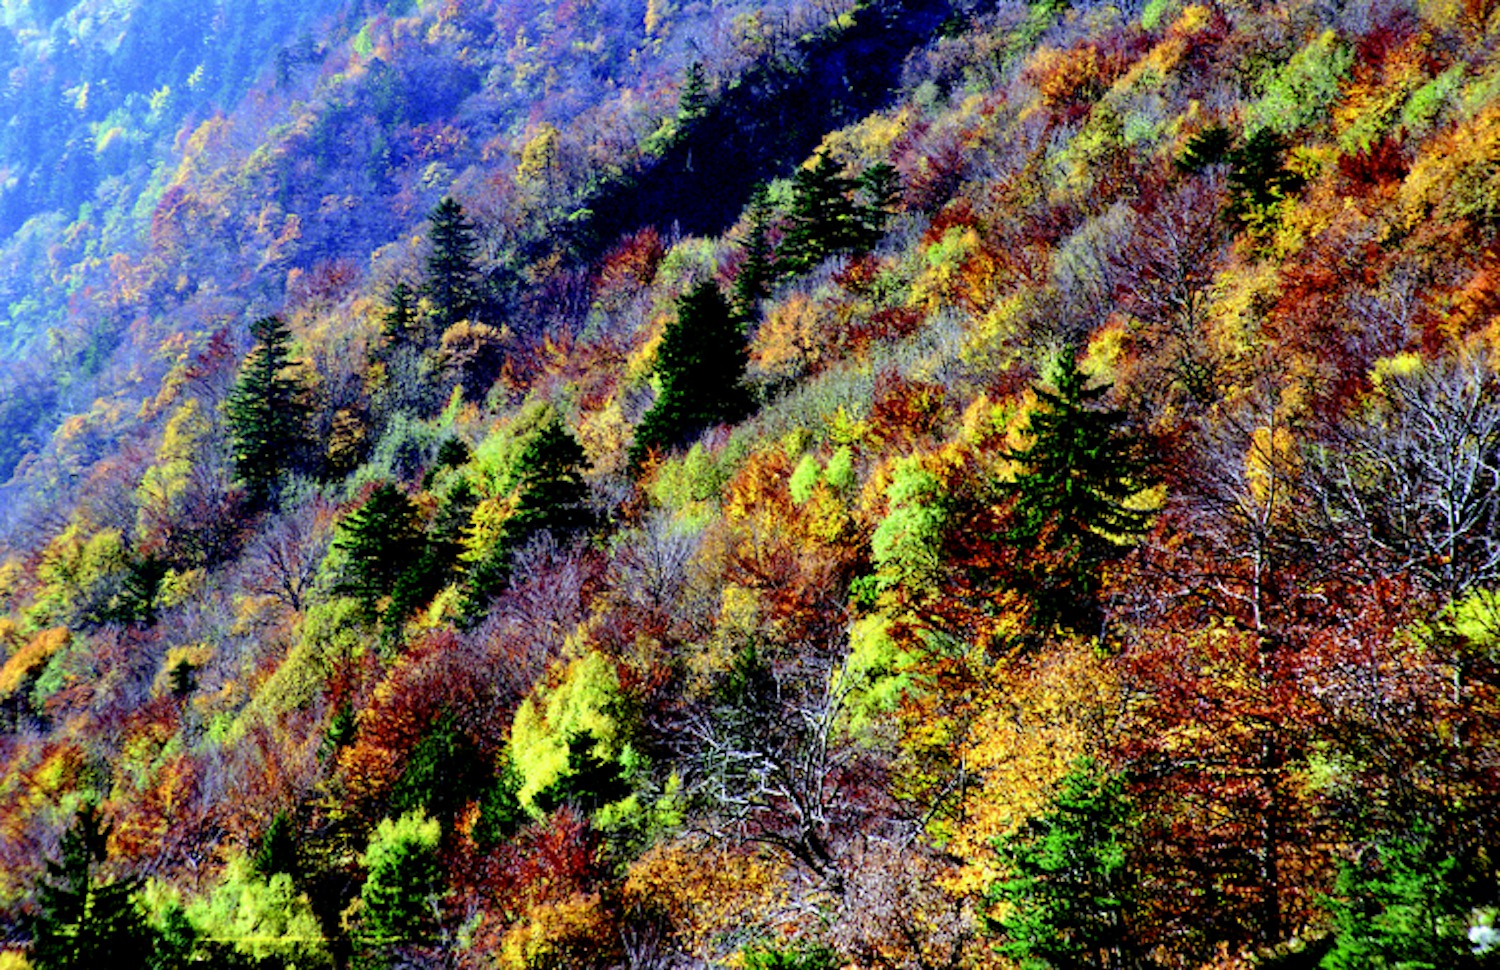 Mountain forests